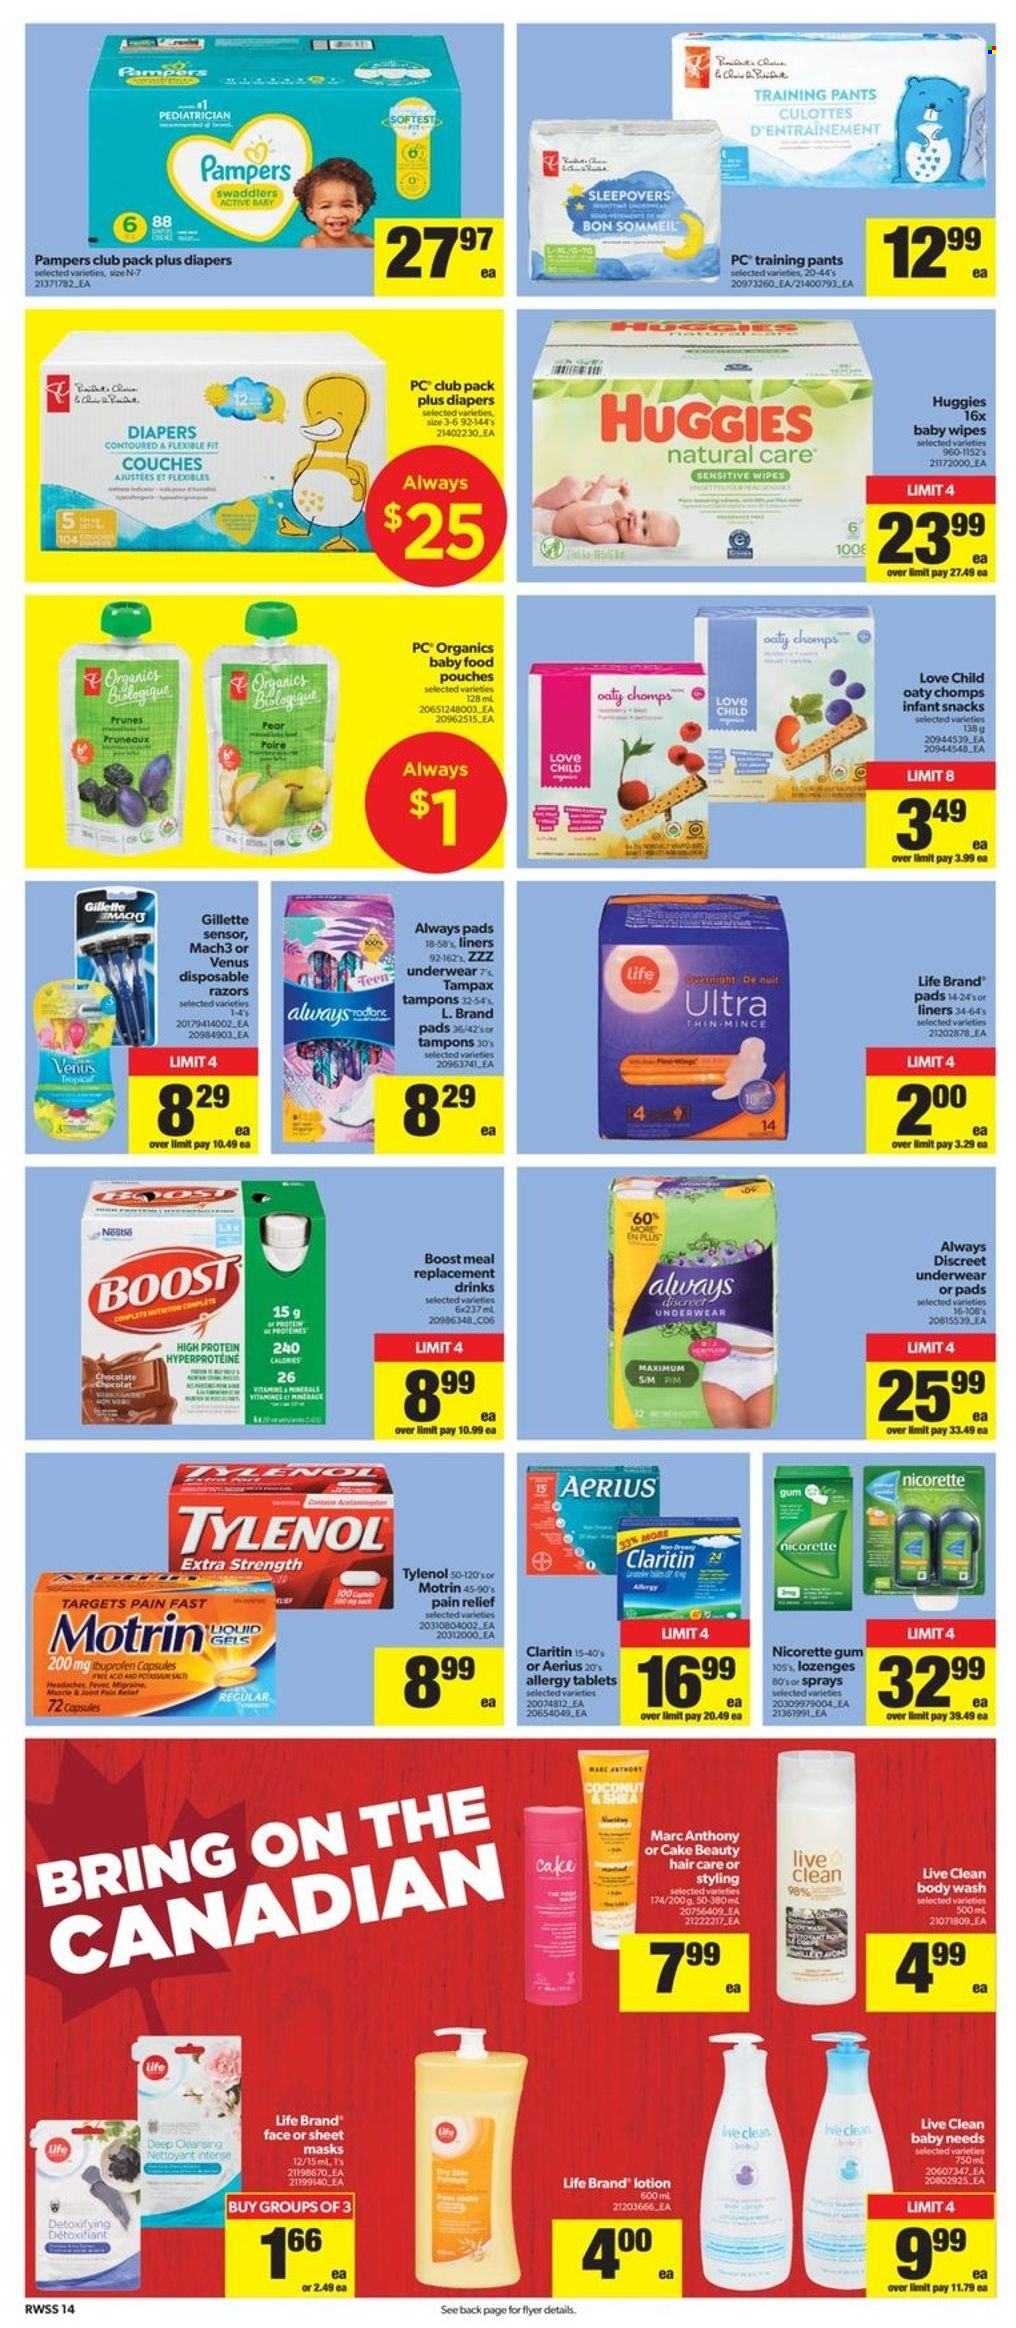 thumbnail - Real Canadian Superstore Flyer - June 30, 2022 - July 06, 2022 - Sales products - cake, coconut, chocolate, snack, salt, prunes, dried fruit, Boost, wipes, pants, baby wipes, nappies, baby pants, body wash, Always pads, sanitary pads, Always Discreet, tampons, Gillette, body lotion, Venus, pain relief, Nicorette, Tylenol, Nicorette Gum, Motrin, Tampax, Huggies, Pampers. Page 16.